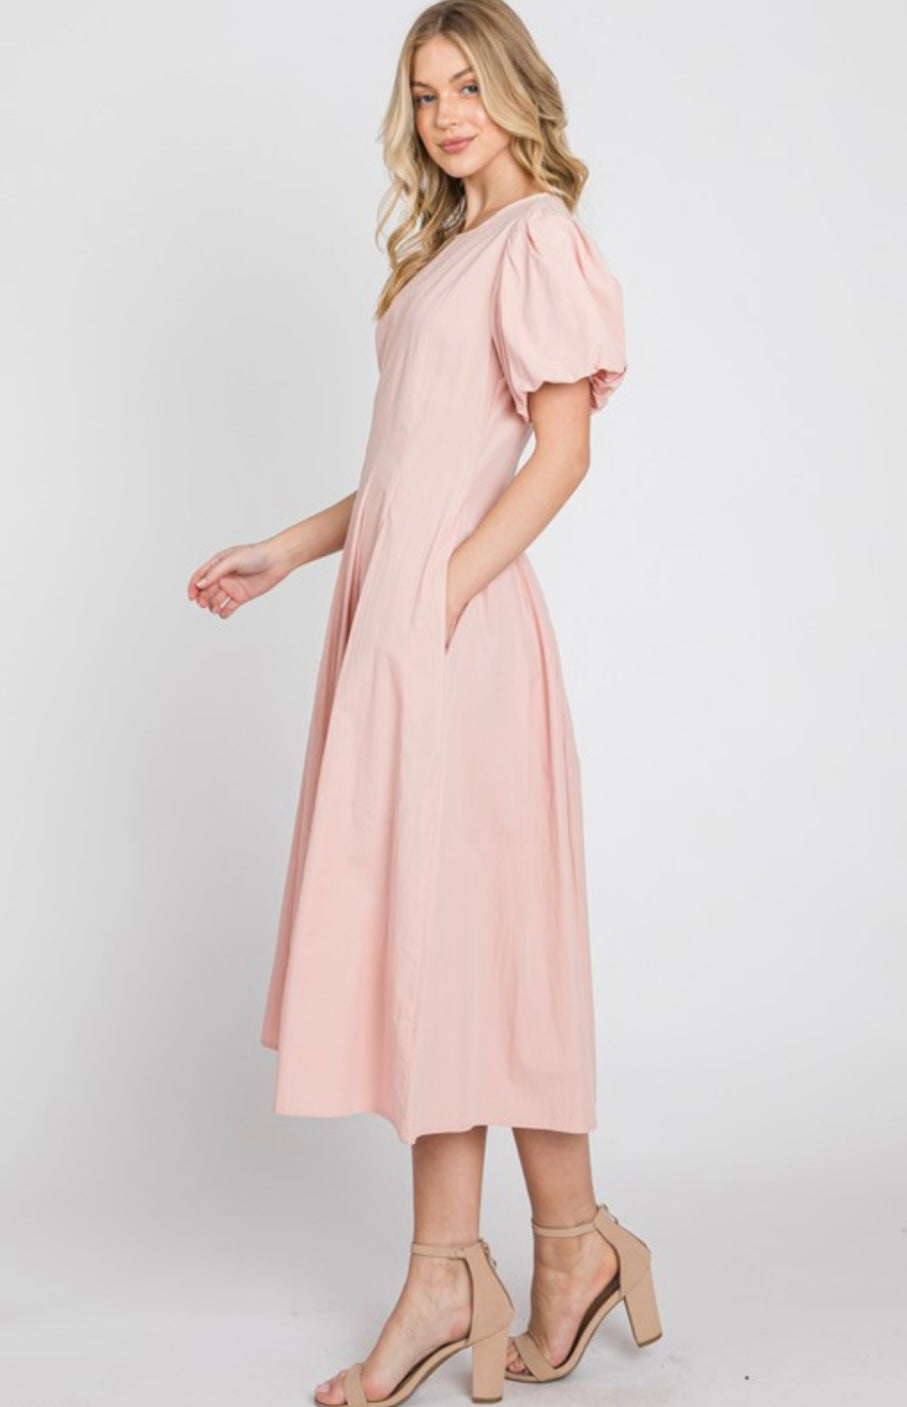 The Pink Lily Dress